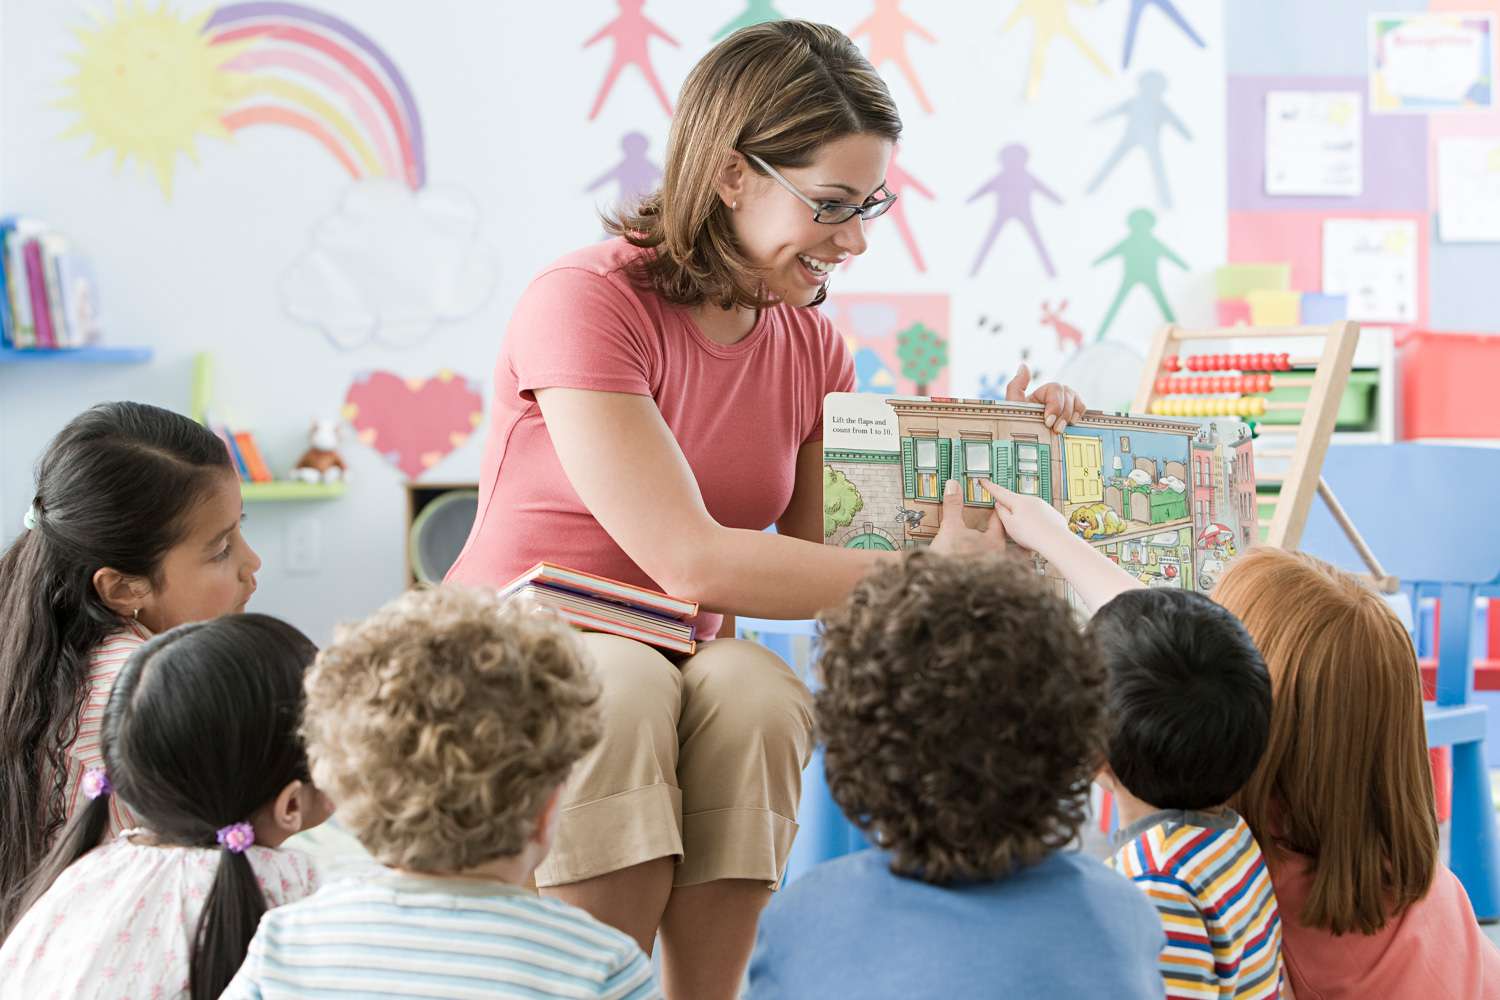 Entire Staff at Ohio Preschool Resigns at Once: 'We Gave Our Life to Those Four Walls'